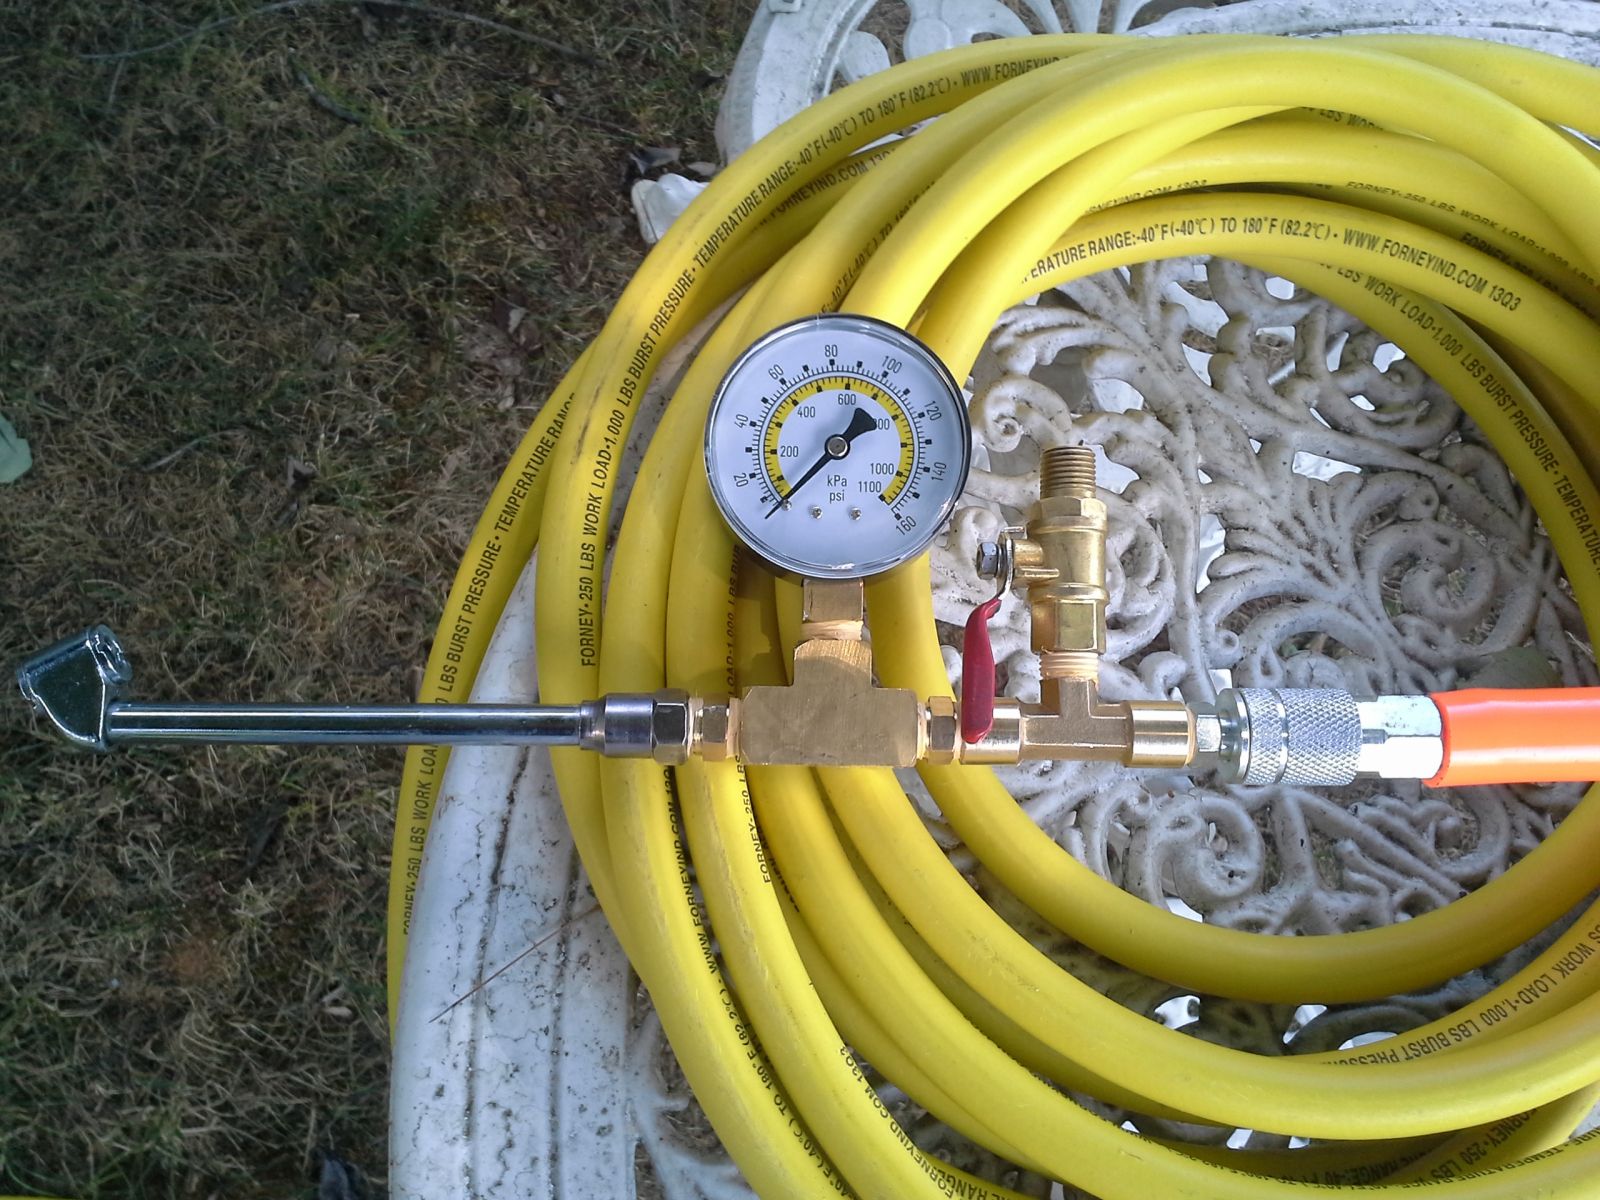 Tire gauge And relief valve with 50 foot hose